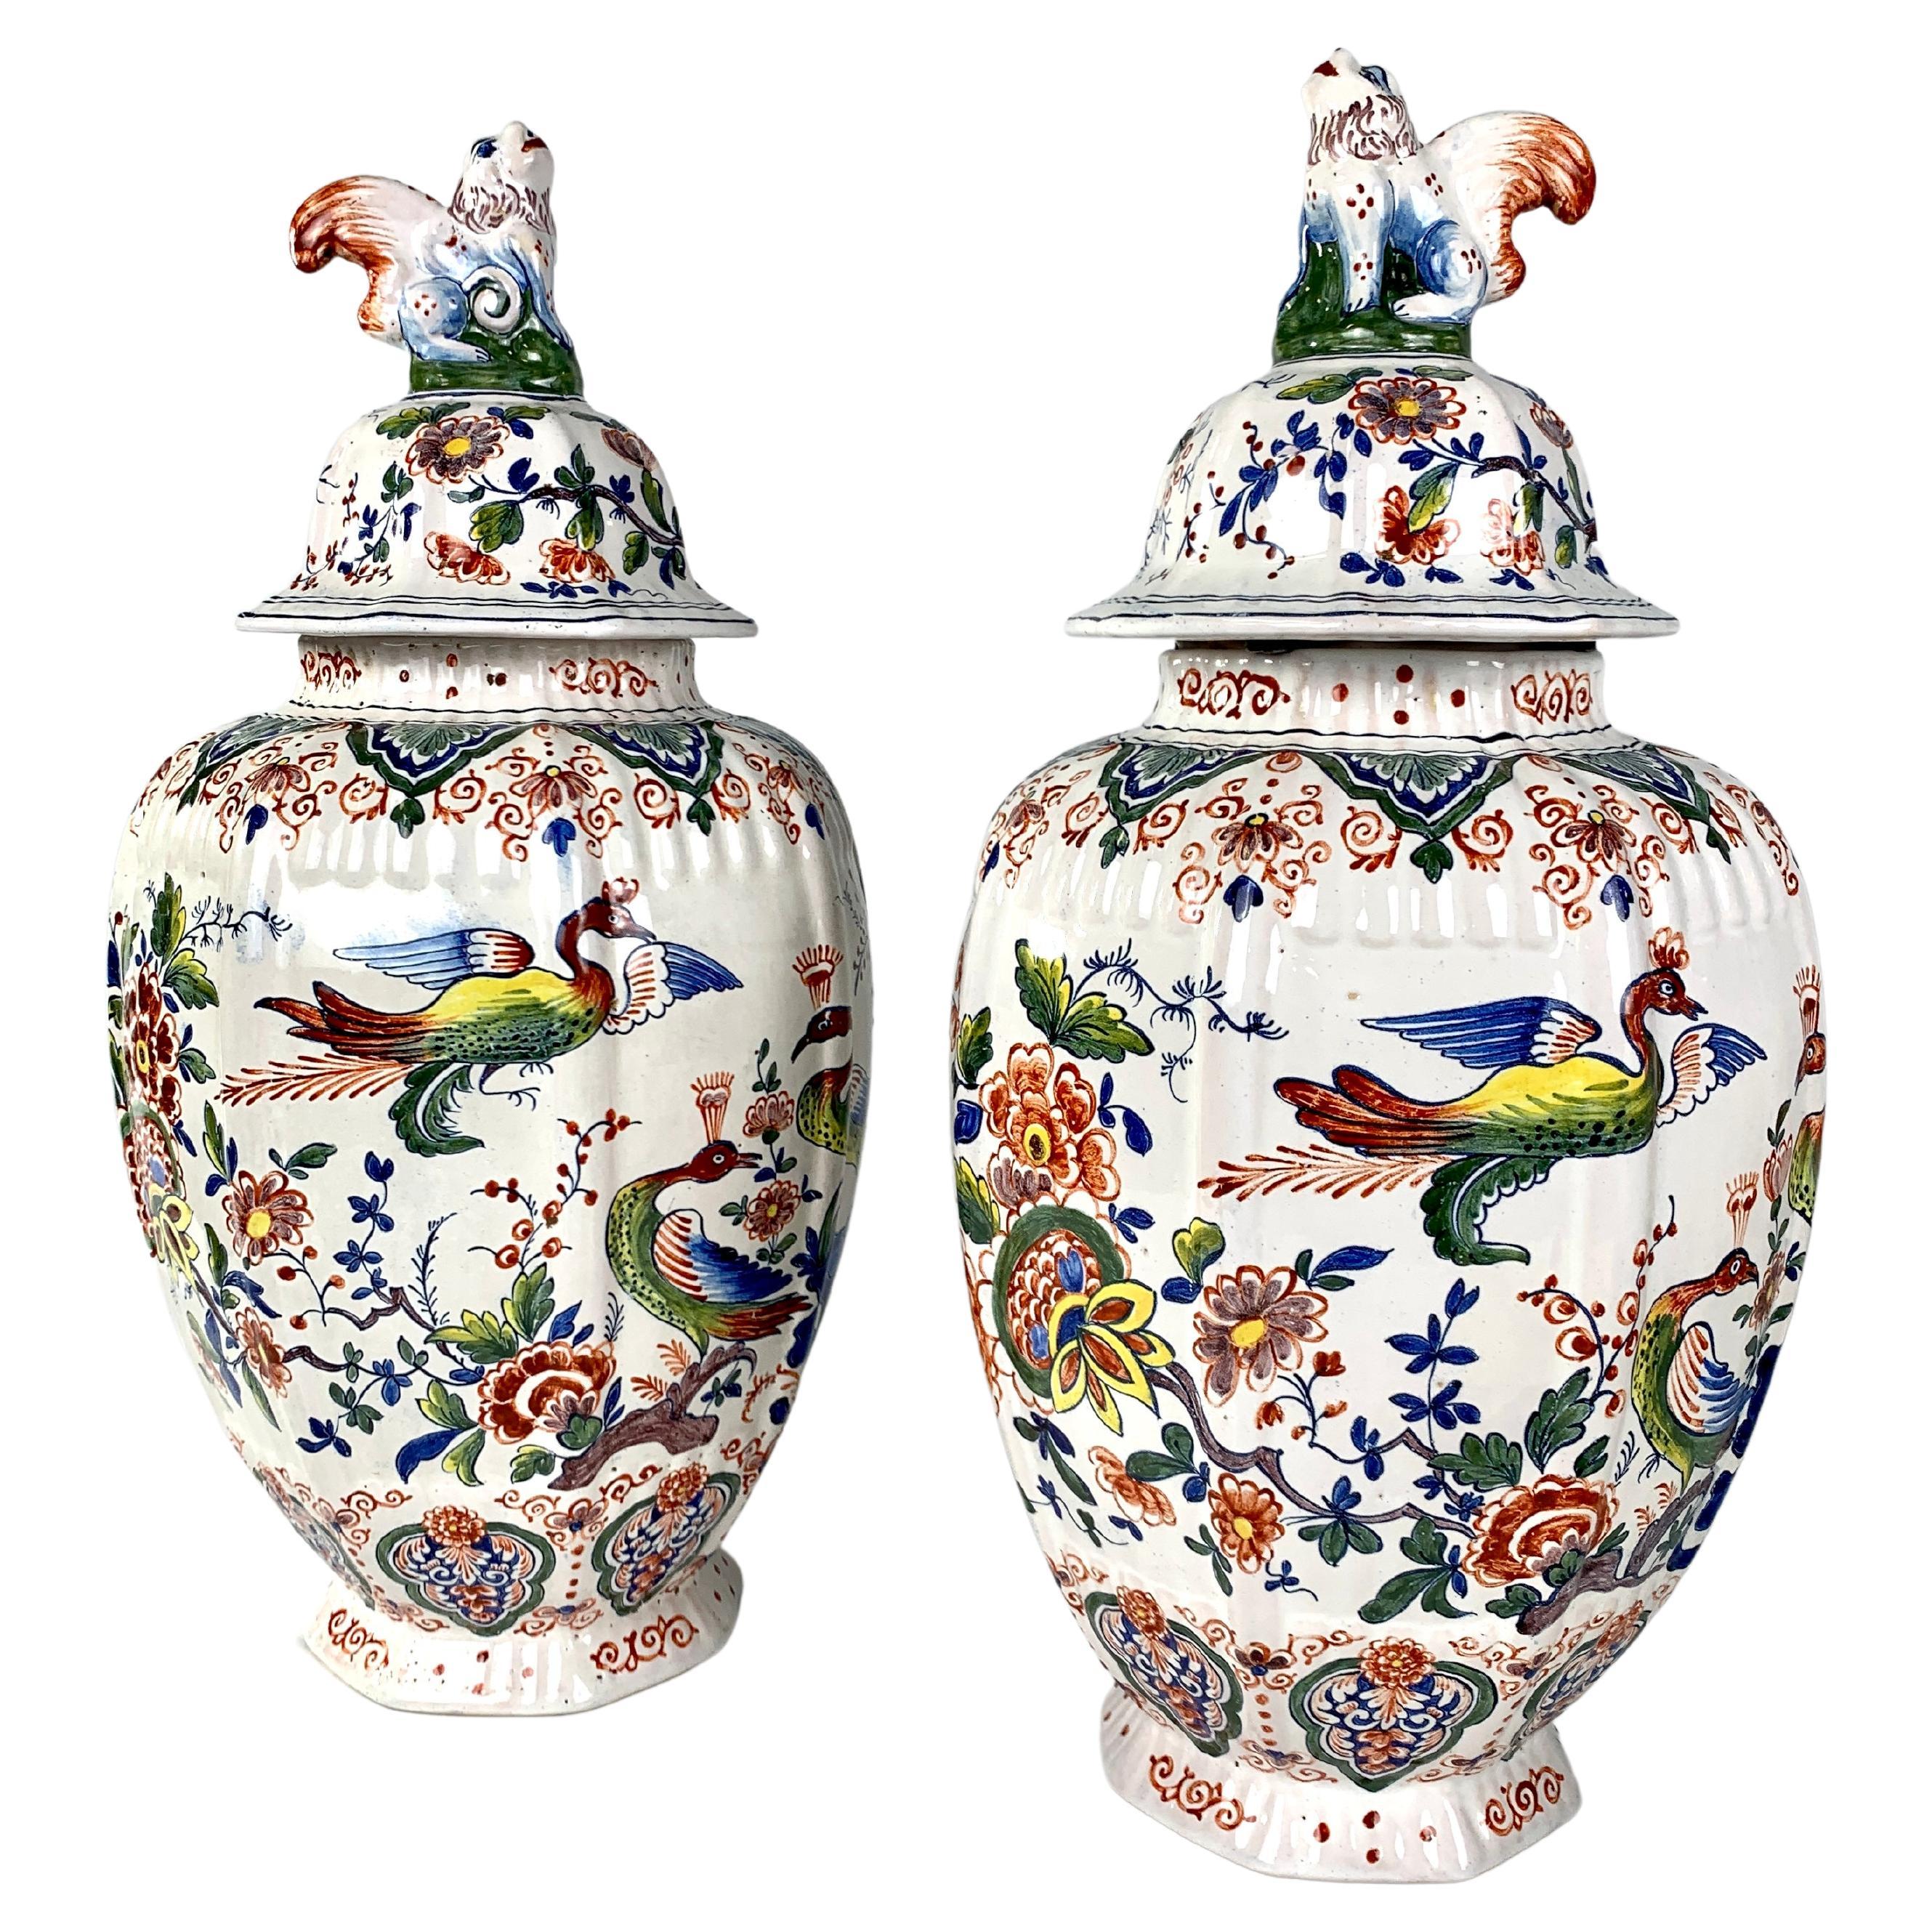 Pair Dutch Delft Jars Hand-Painted in Traditional Polychrome Colors